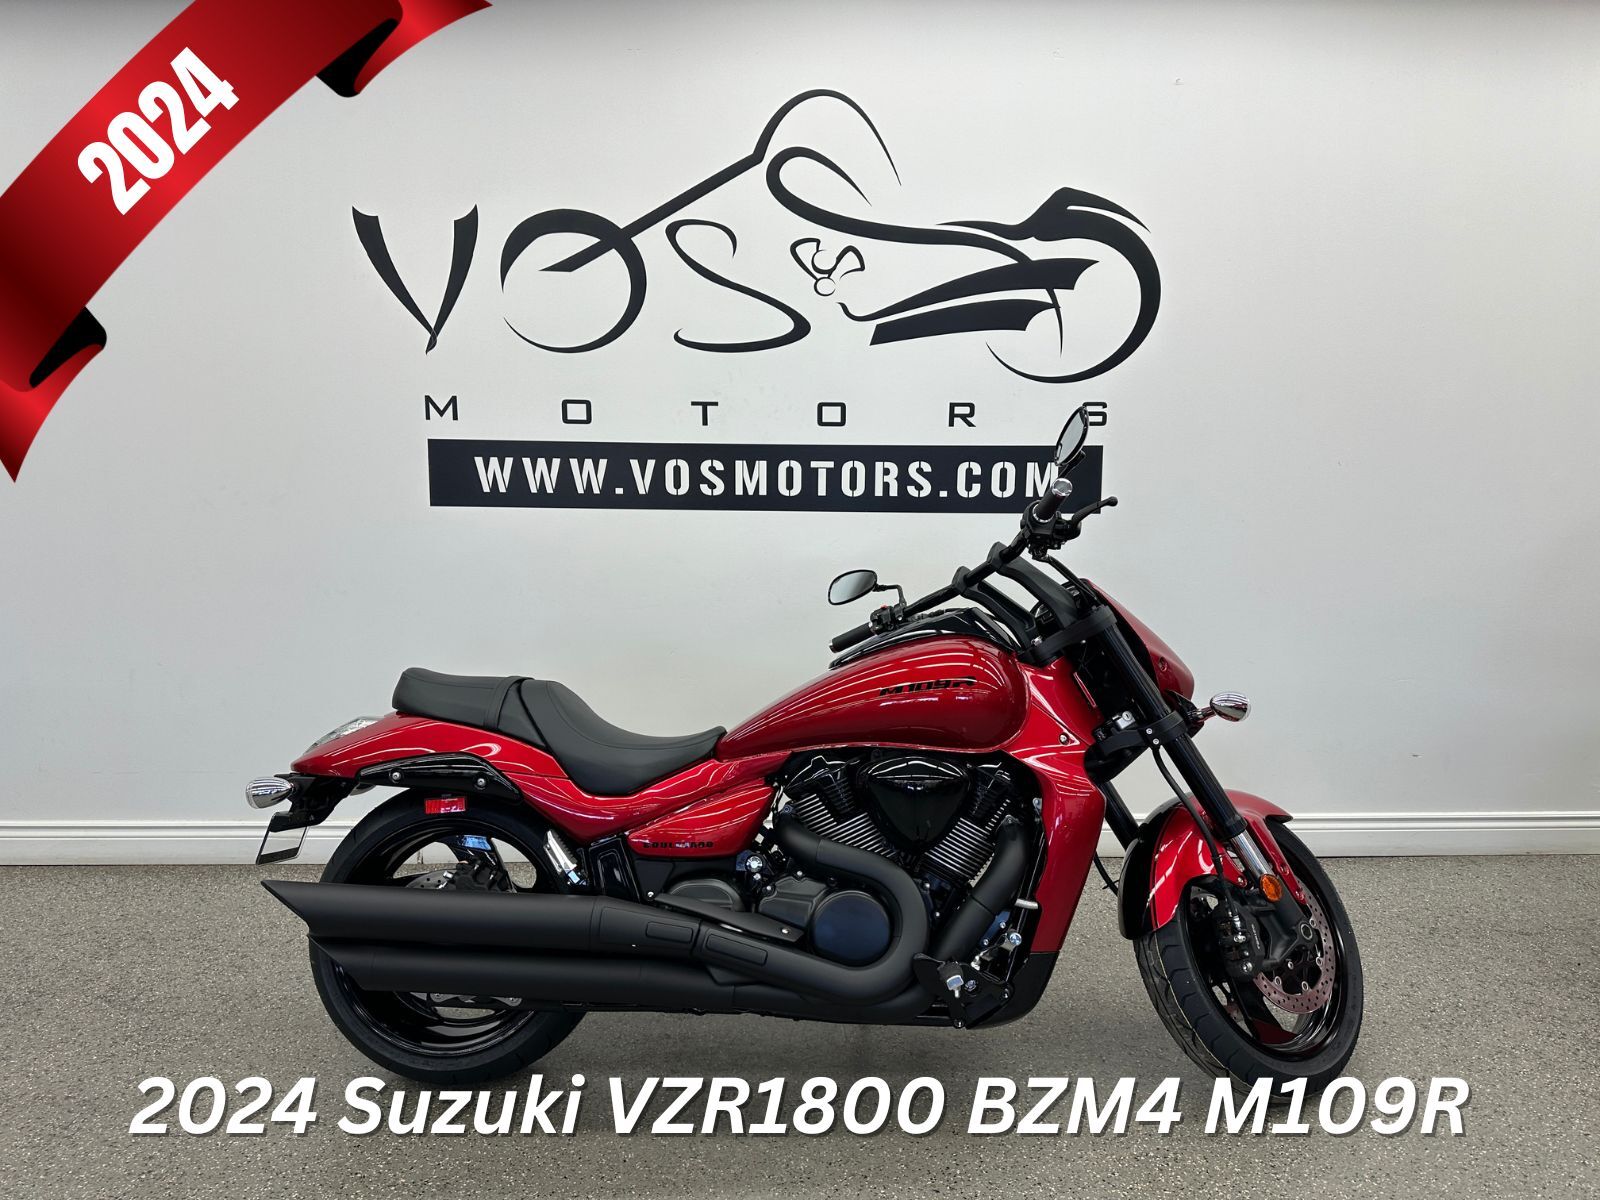 2024 Suzuki VZR1800BZM4 VZR1800BZM4 - V5990NP - -No Payments for 1 Year**